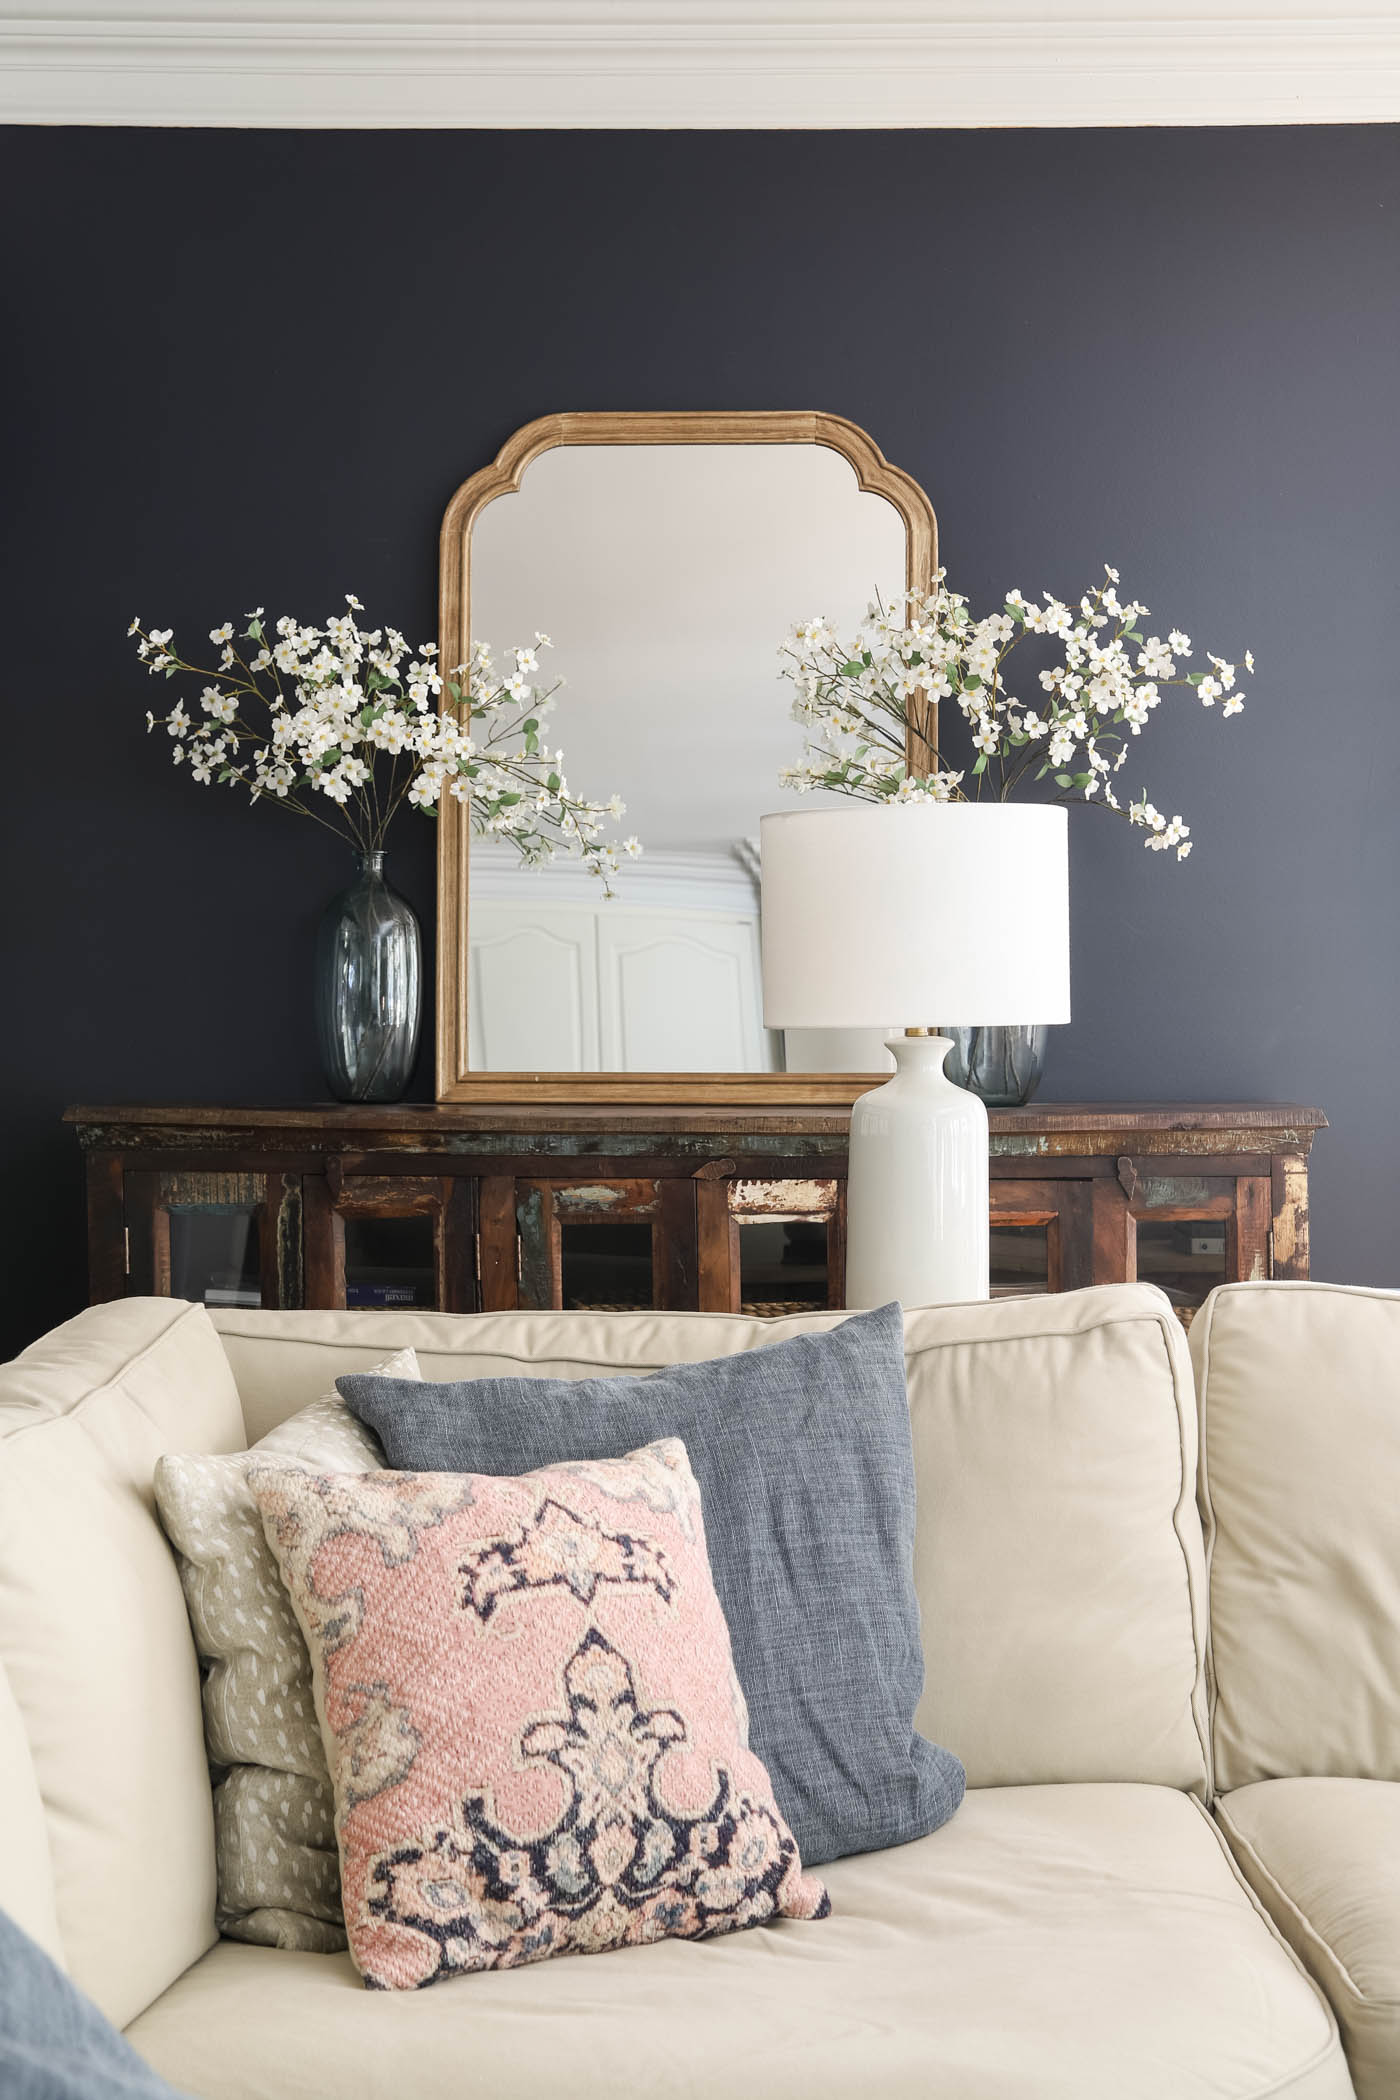 9 Simple Ways To Decorate Your Home For Spring